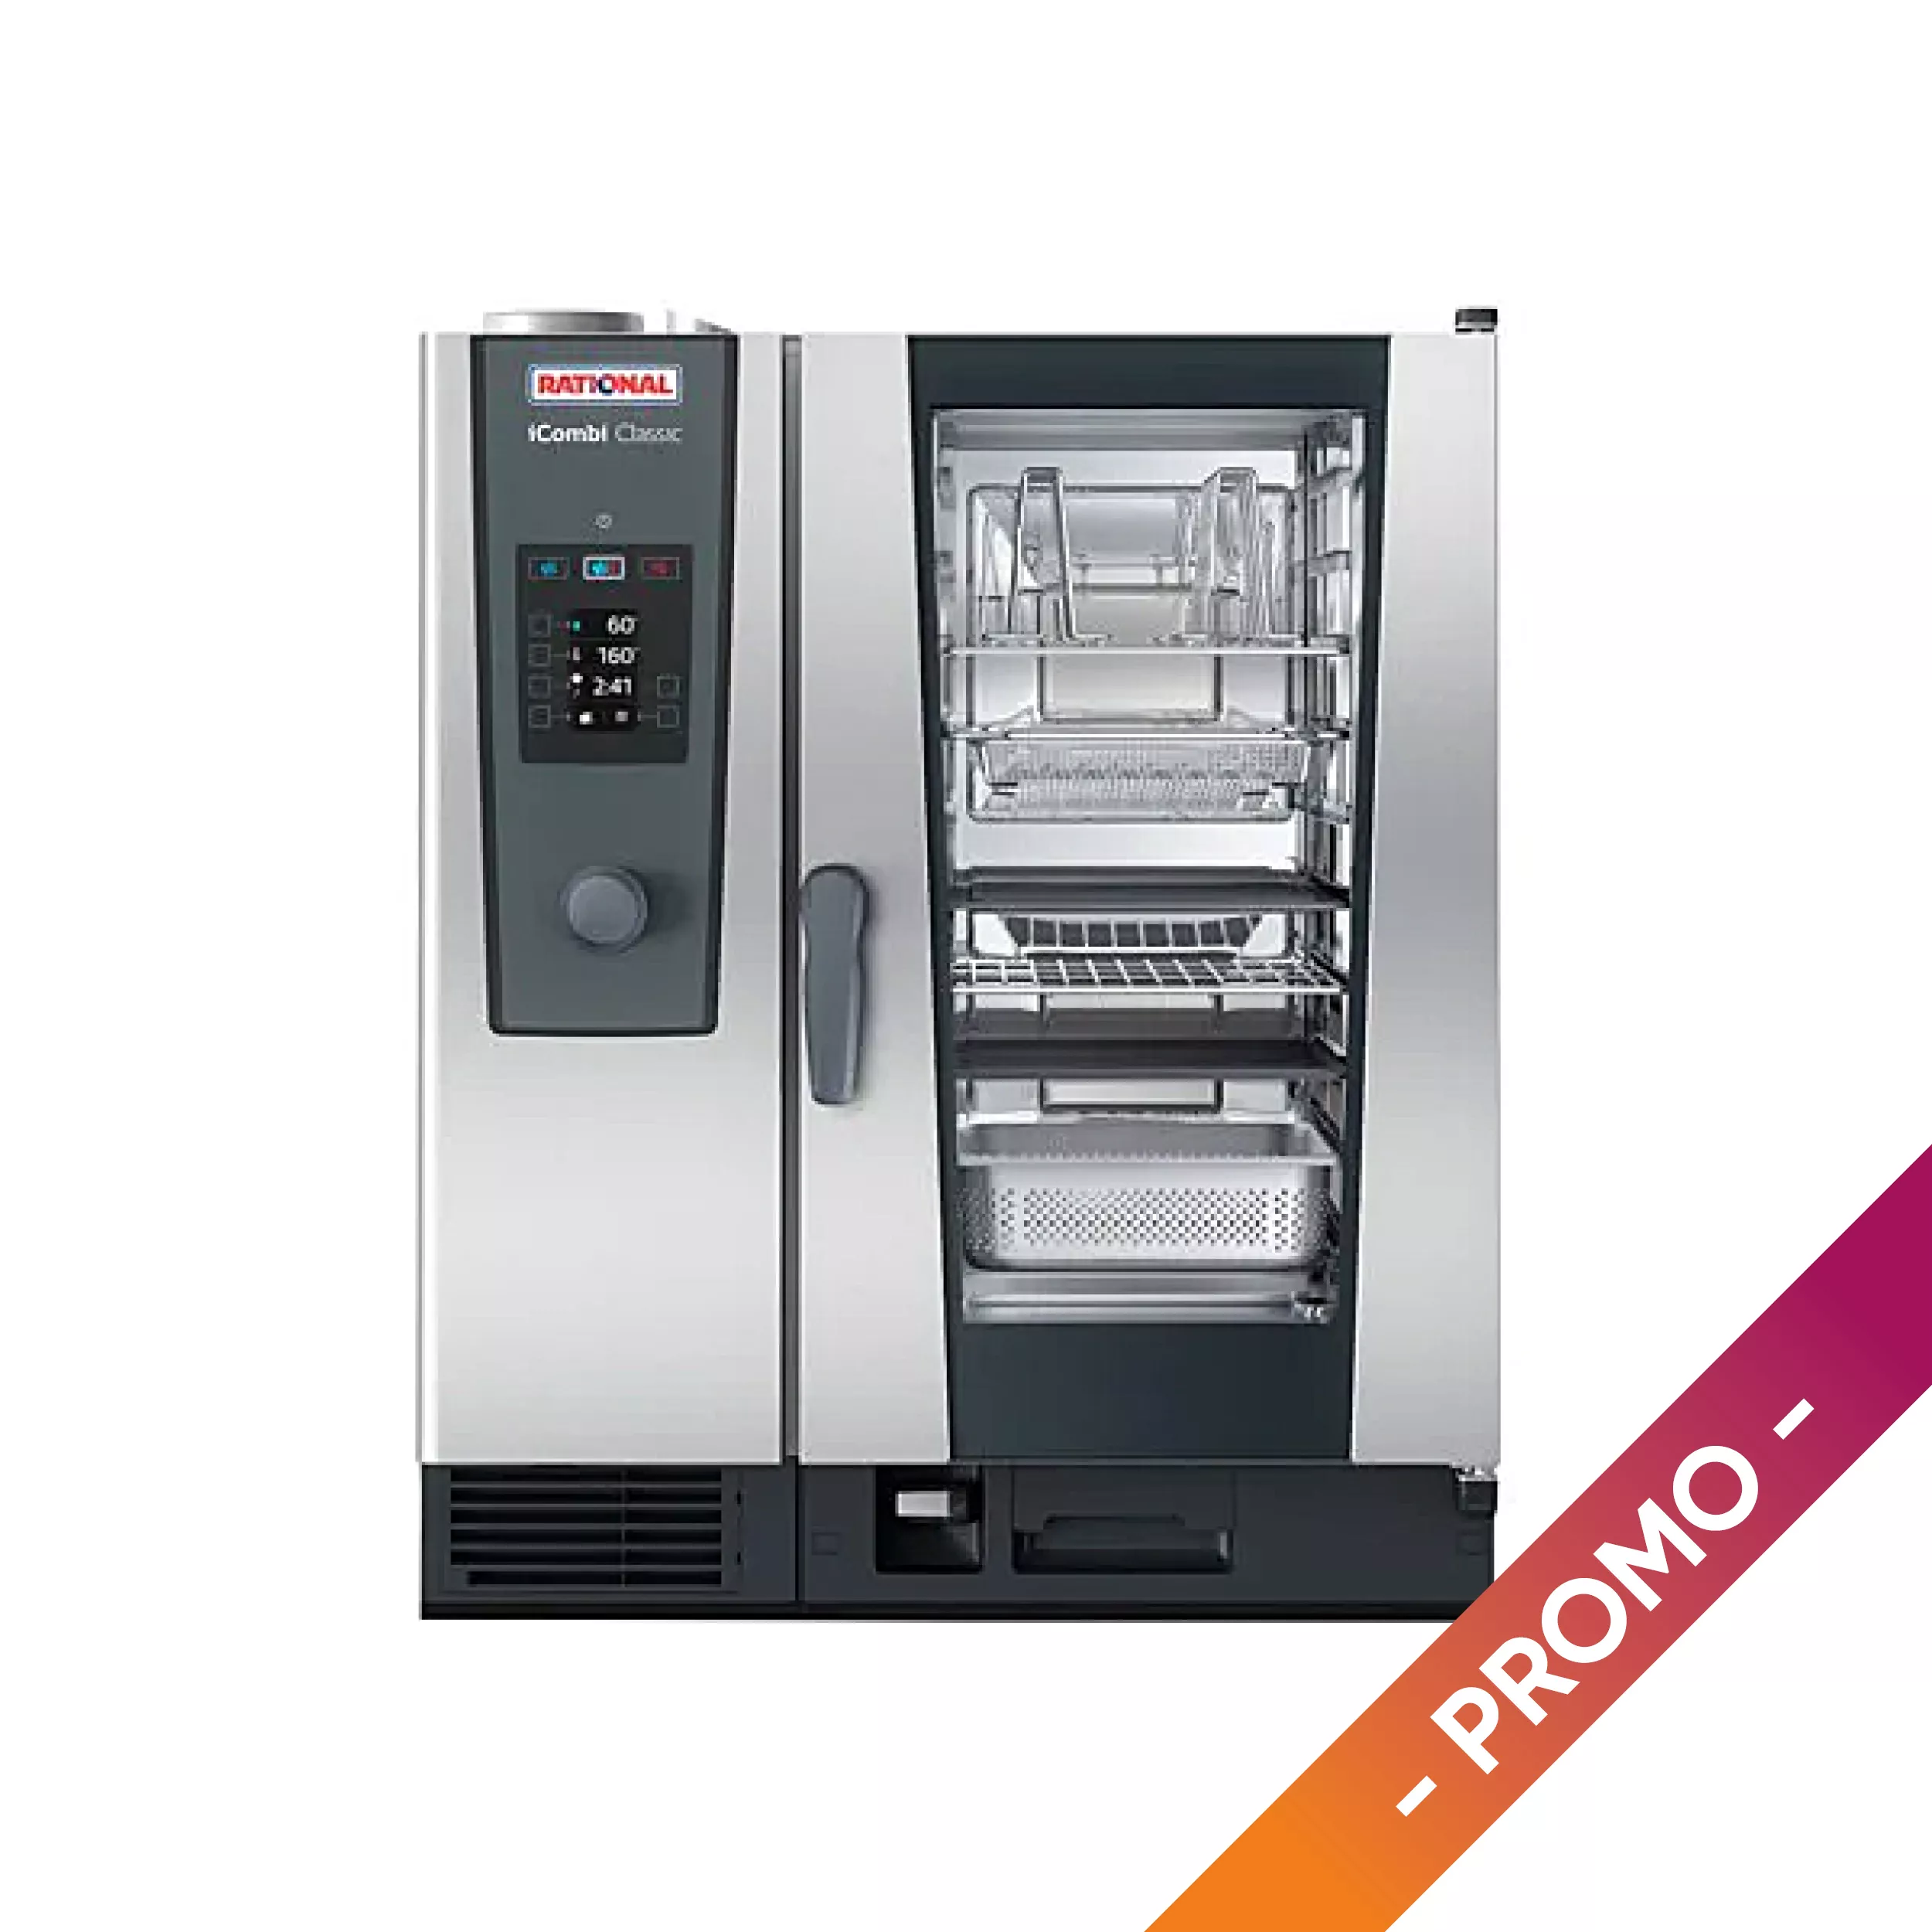 RATIONAL® ICOMBI CLASSIC ELECTRIC OVEN (10 GASTRONORM 1/1 TRAYS) DIMENSIONS 850X842X1014H MM, THREE-PHASE 400V POT. 18.9KW.